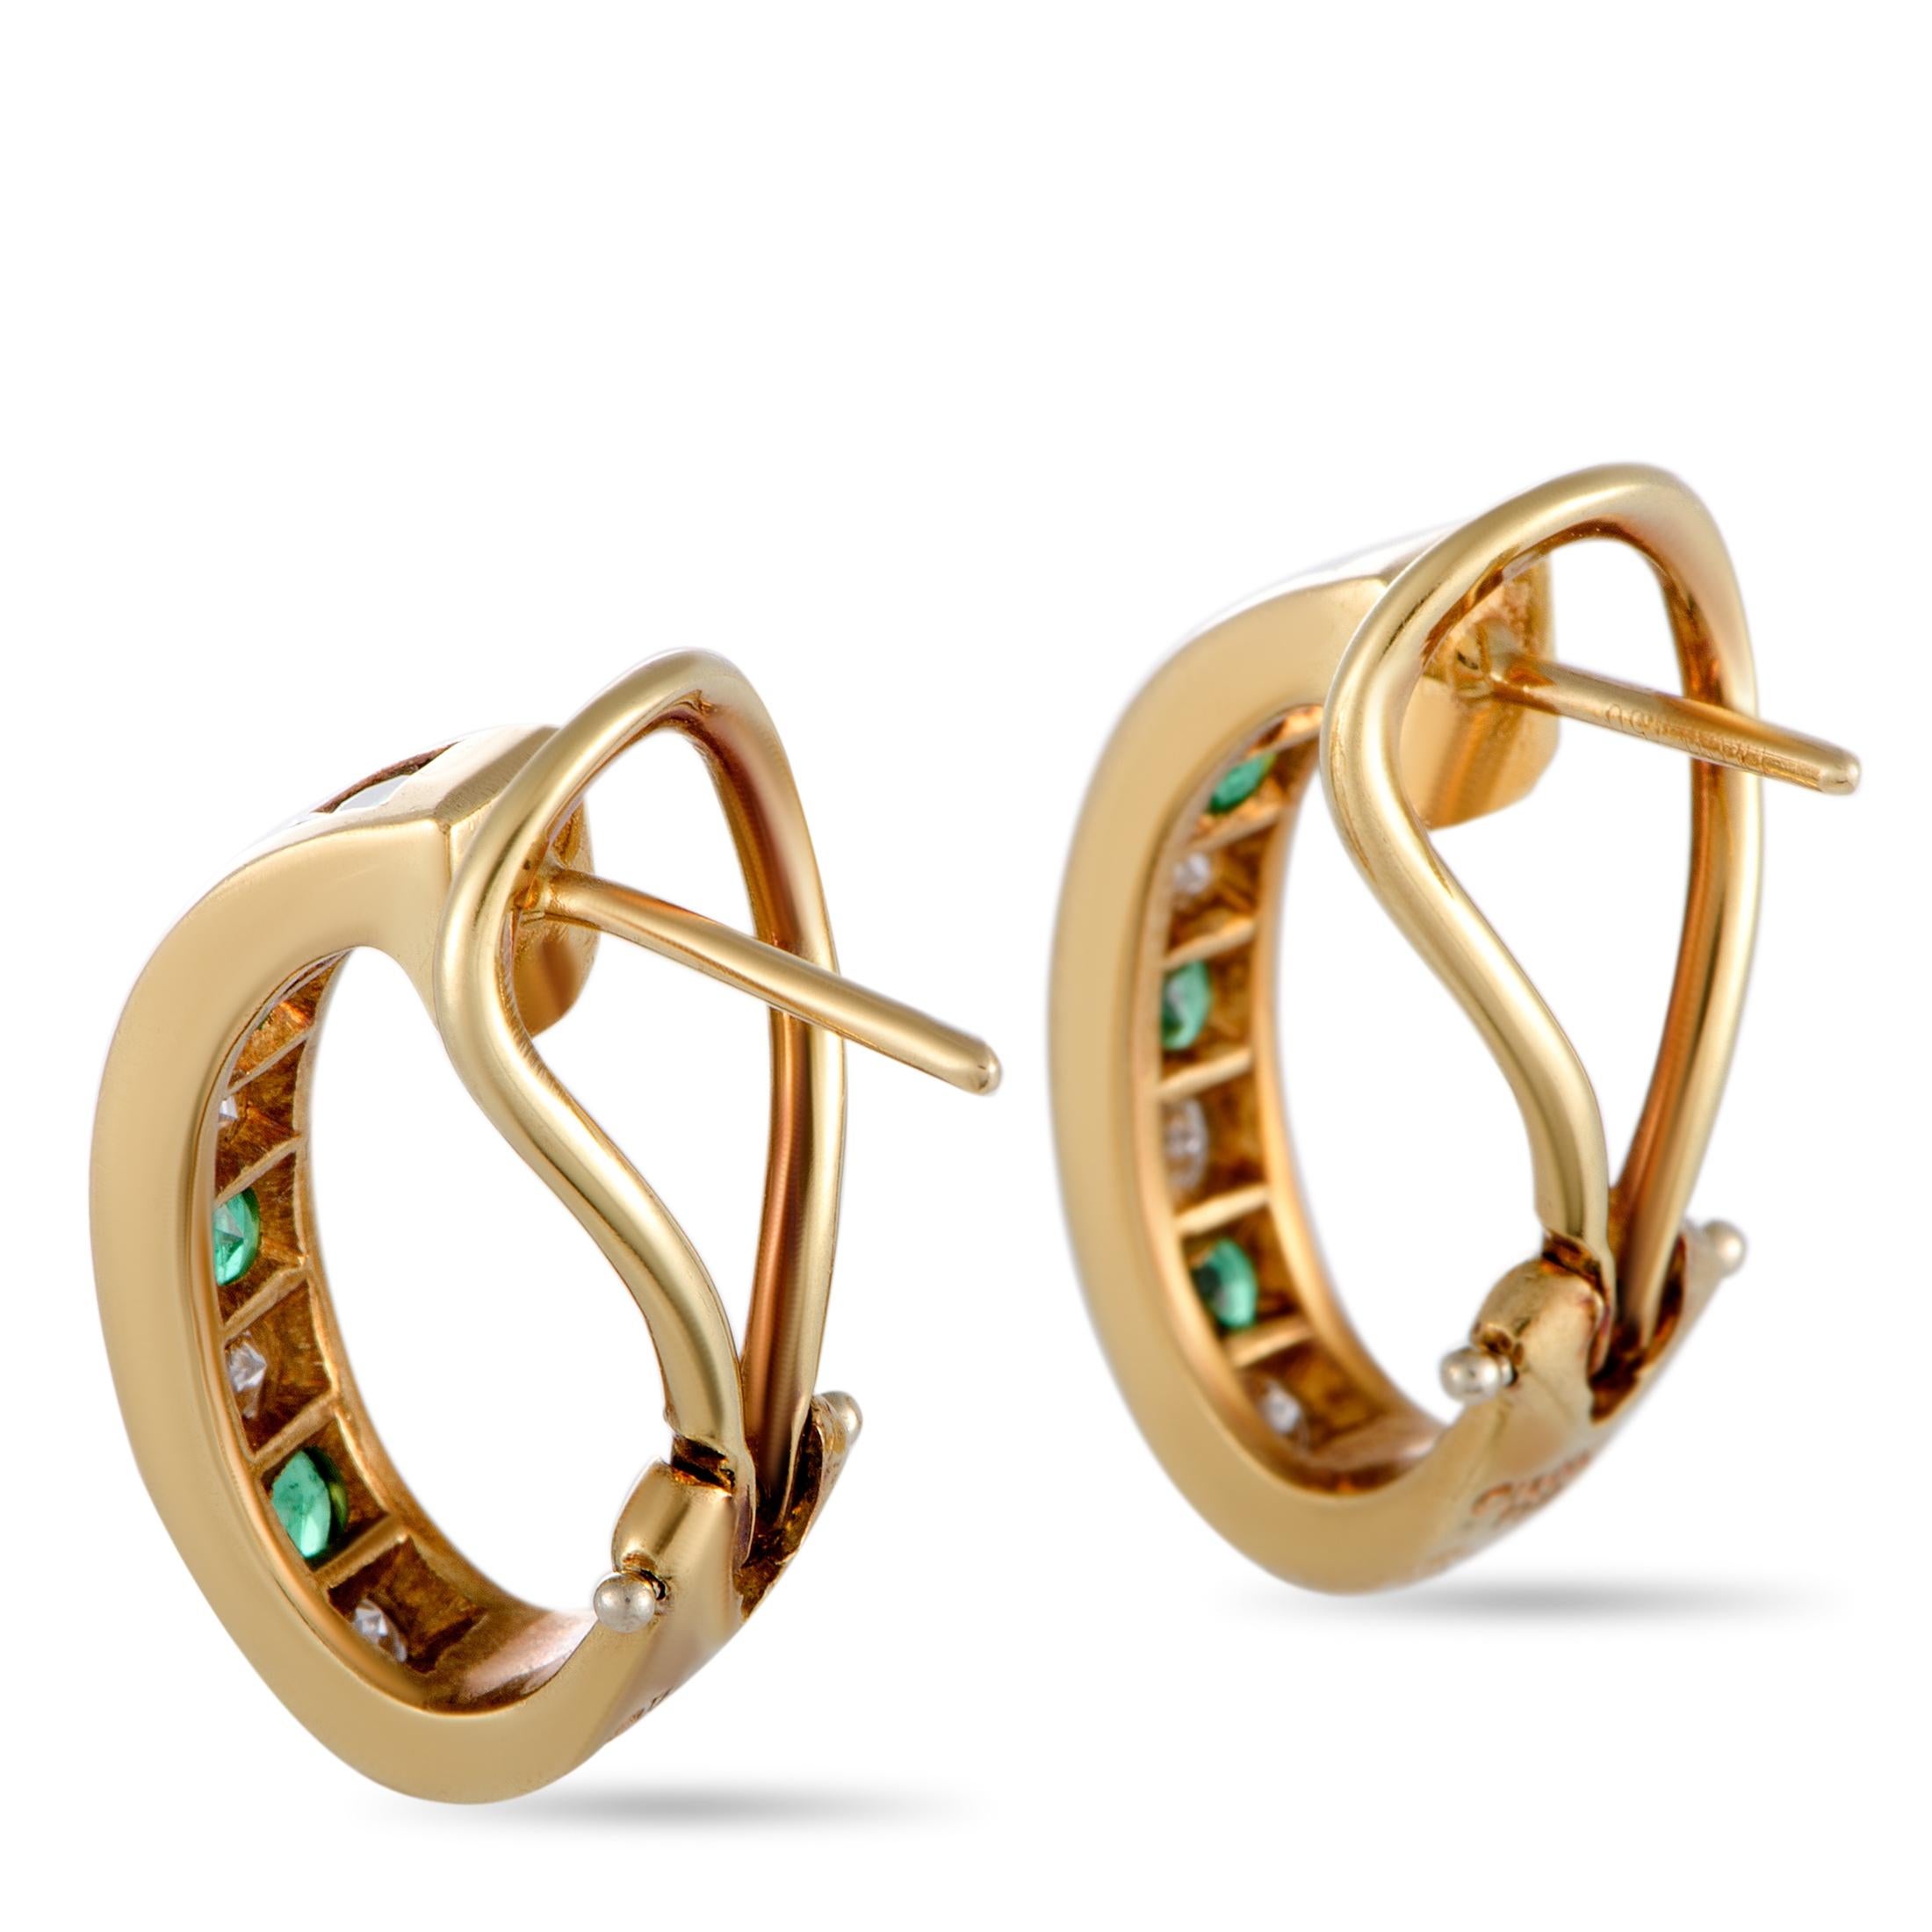 These Tiffany & Co. earrings are crafted from 18K yellow gold and each weighs 3.4 grams, measuring 0.75” in length and 0.15” in width. The earrings are set with emeralds that amount to approximately 0.50 carats, and with a total of 0.48 carats of